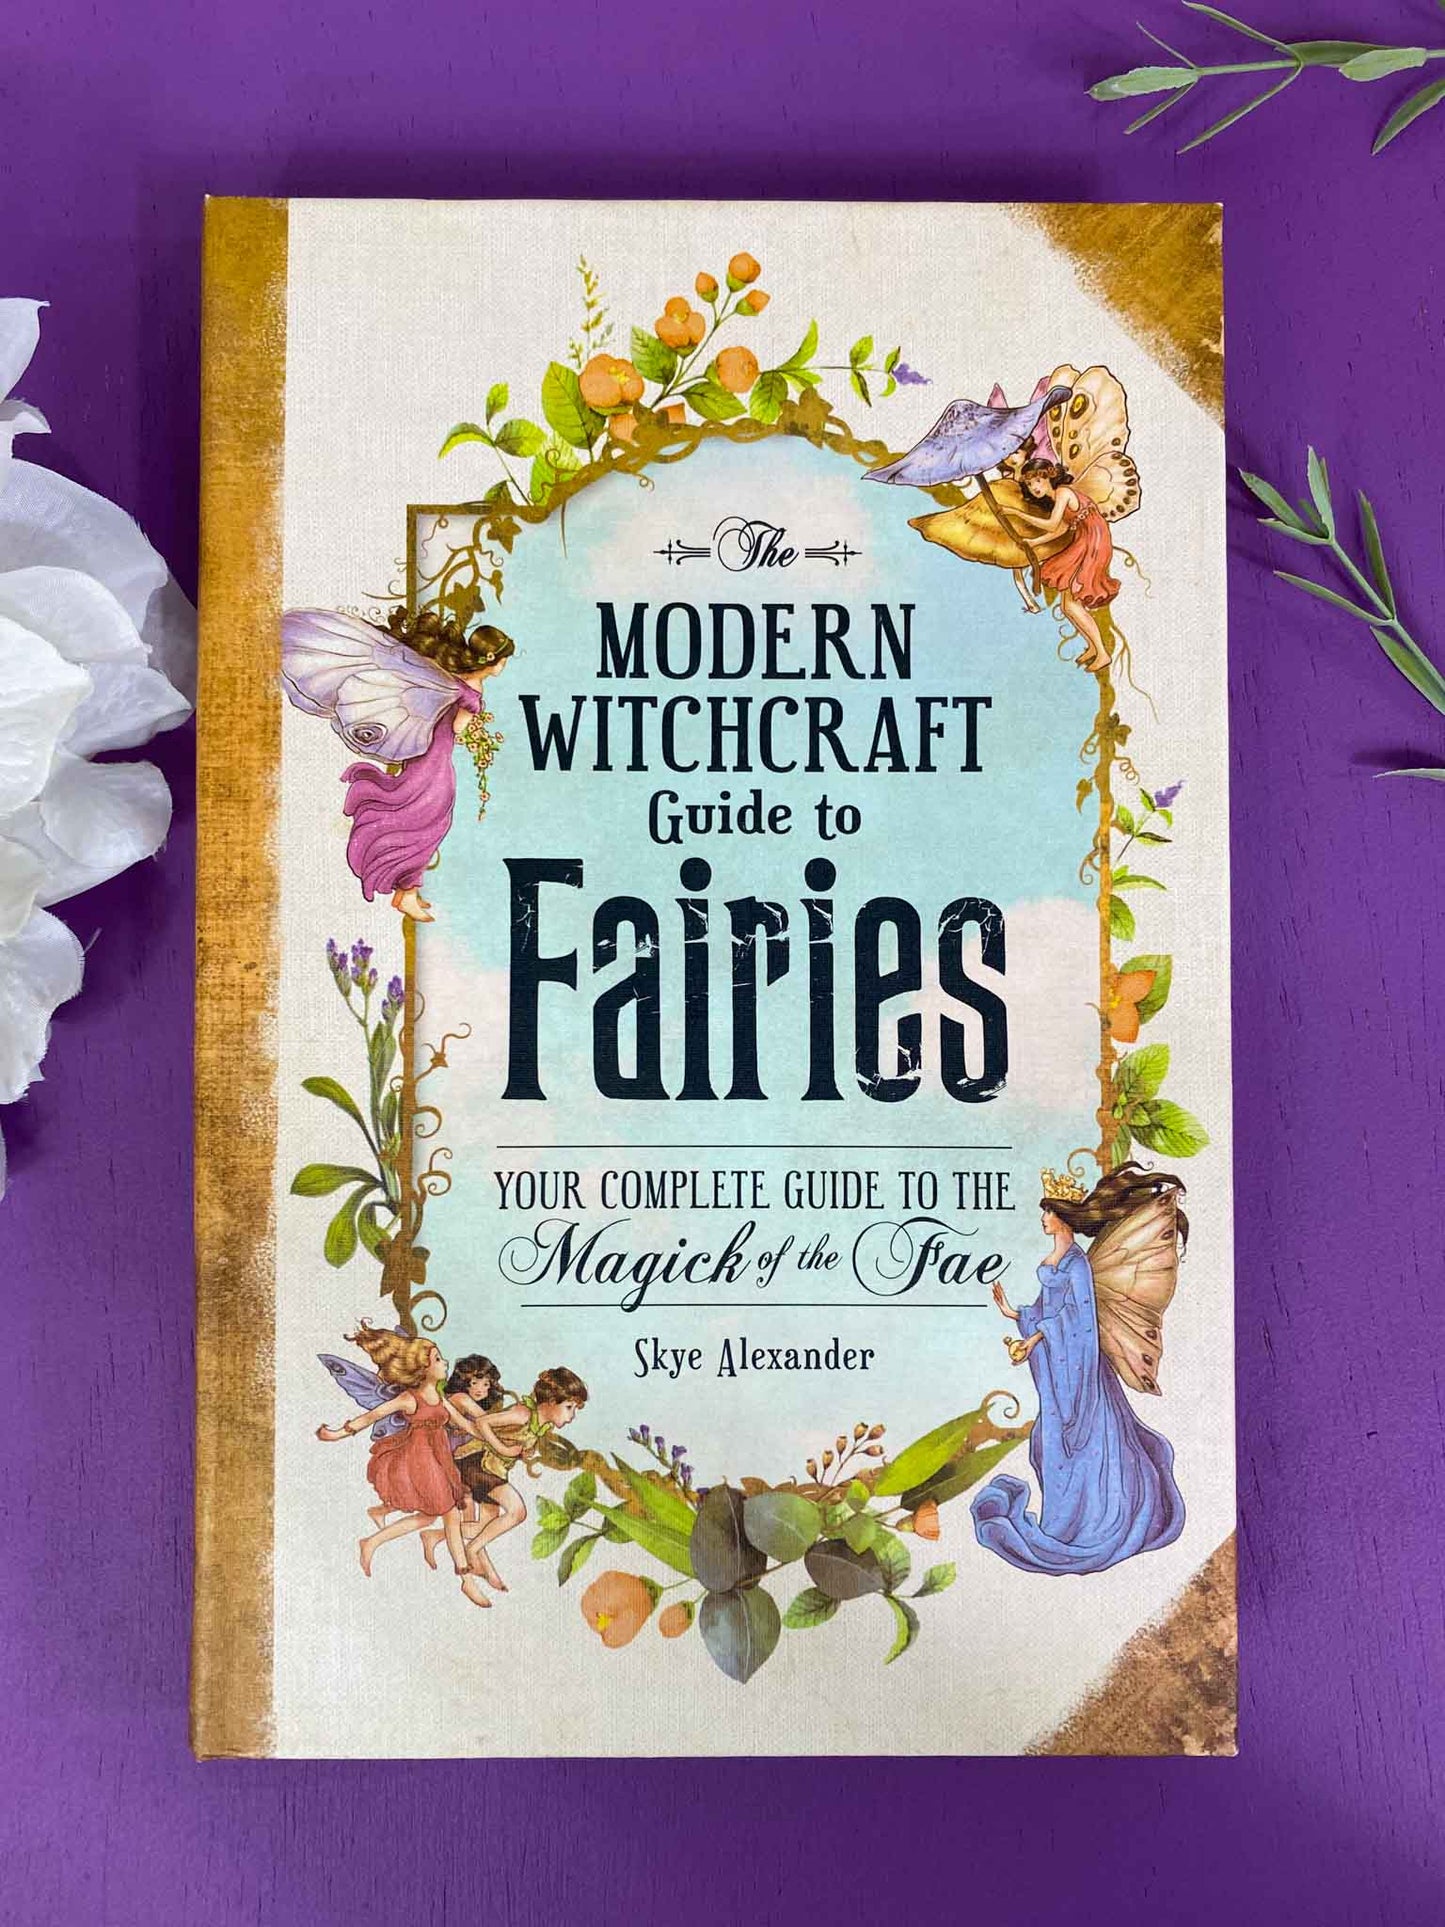 The Modern Witchcraft Guide to Fairies: Your Complete Guide to the Magicking of the Fae